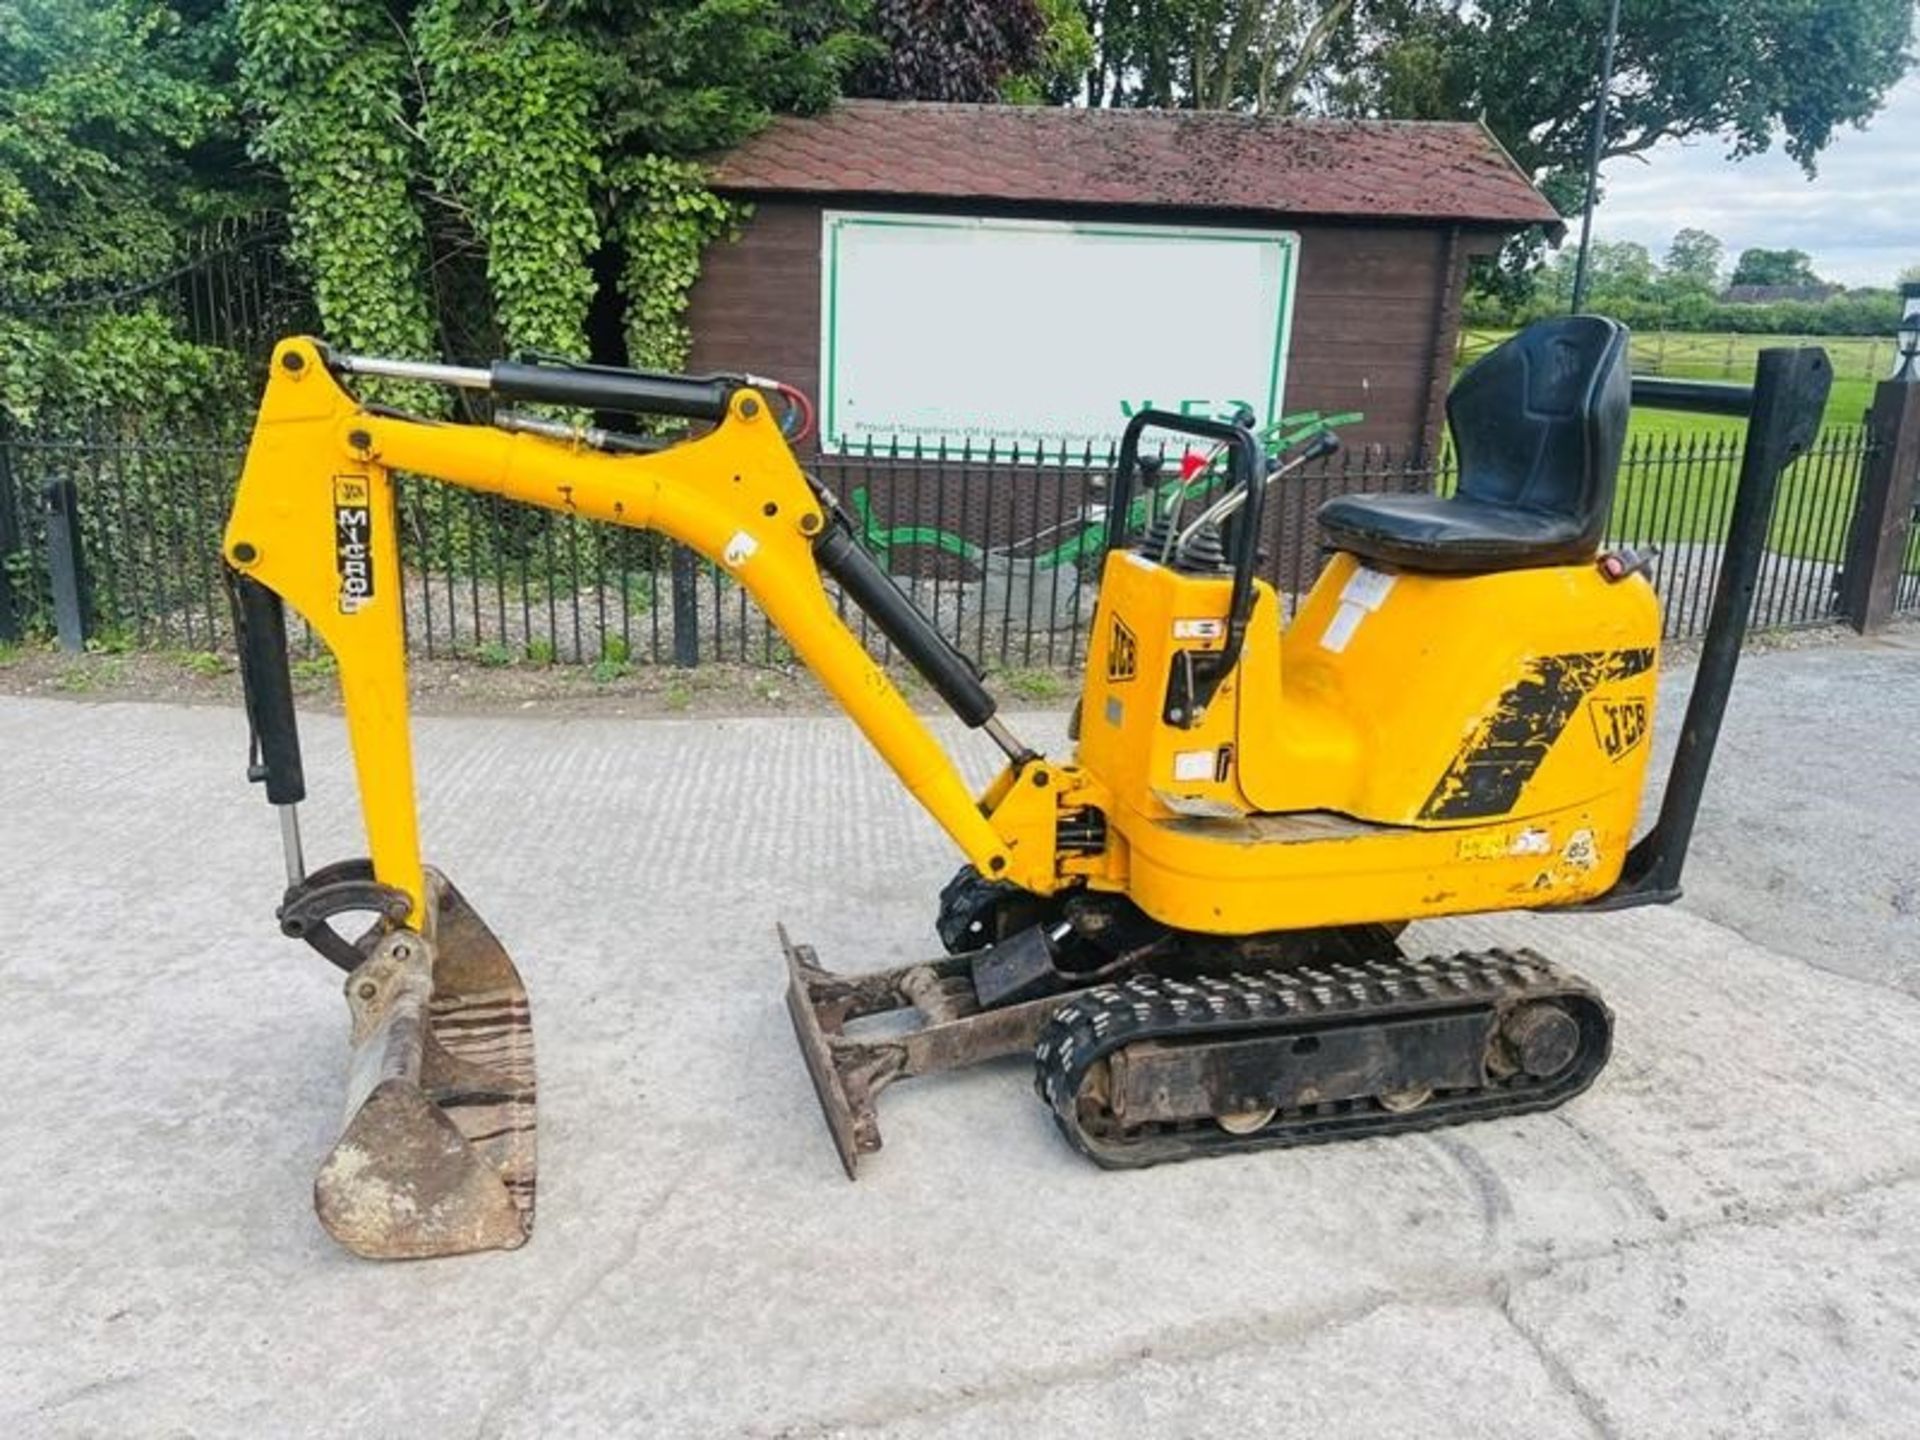 JCB MICRO DIGGER *2753 HOURS* C/W EXPANDING & RUBBER TRACKS